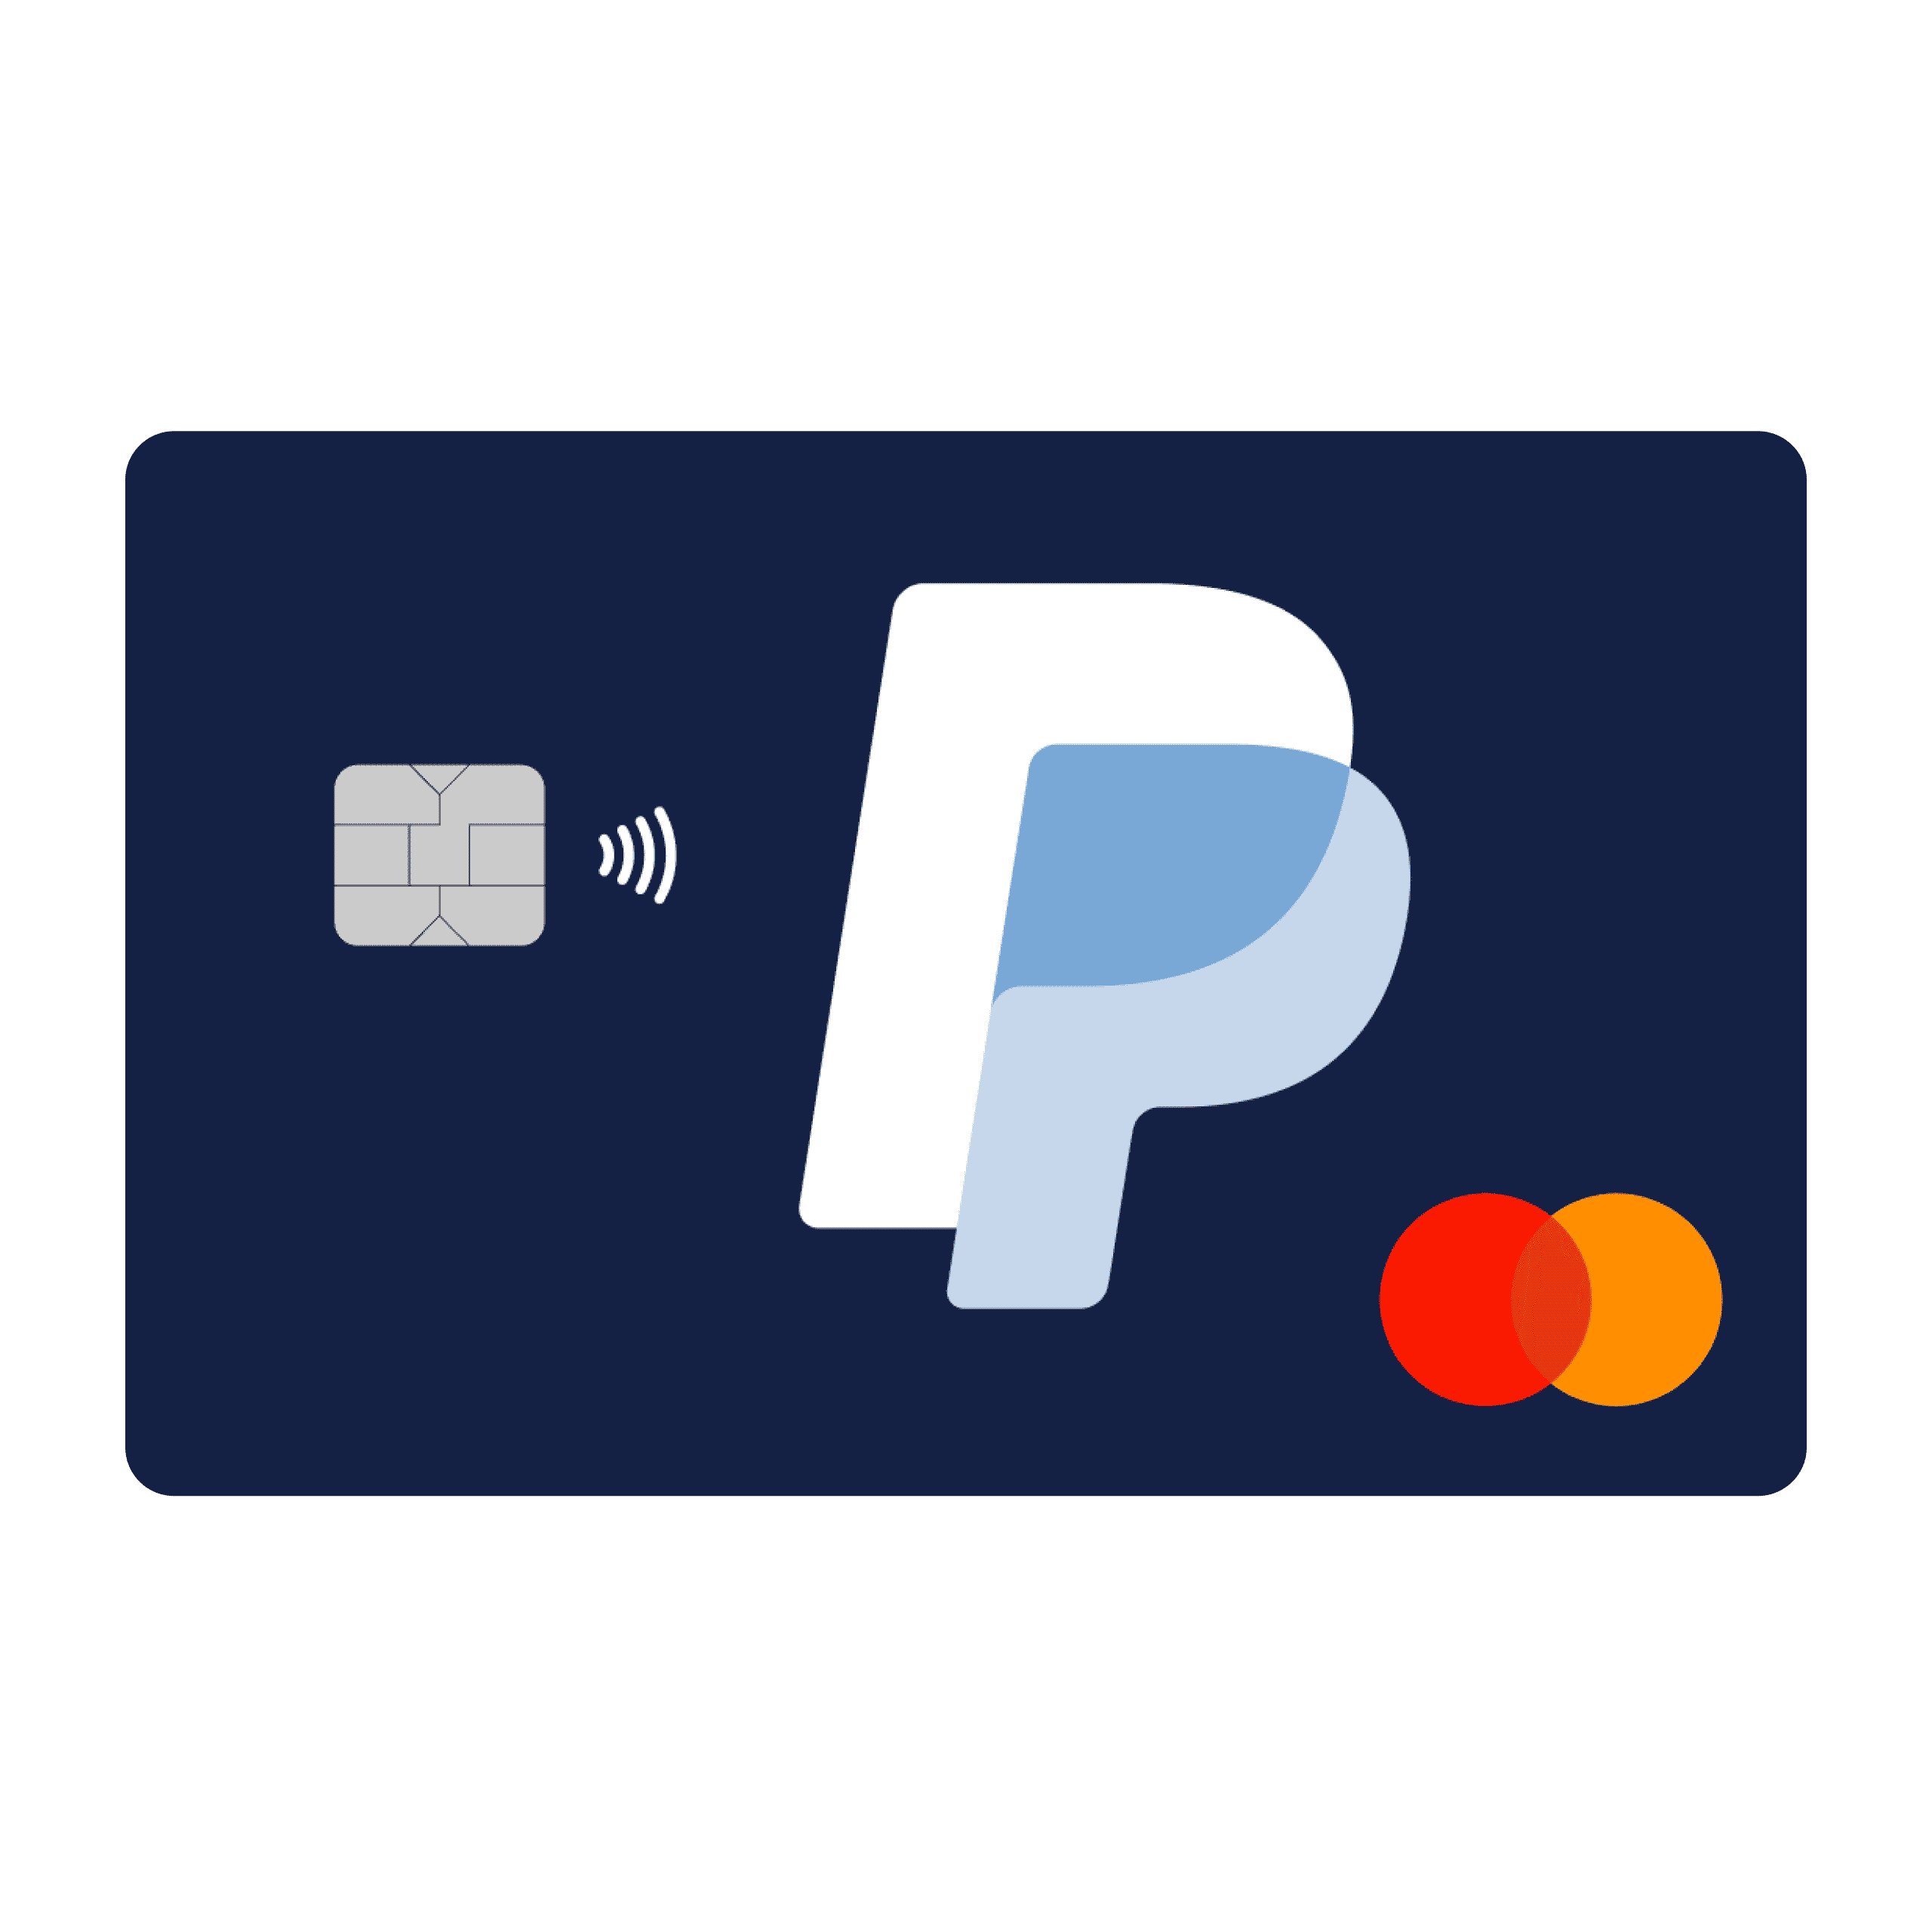 The 14 Latest PayPal Scams (and How To Avoid Them)